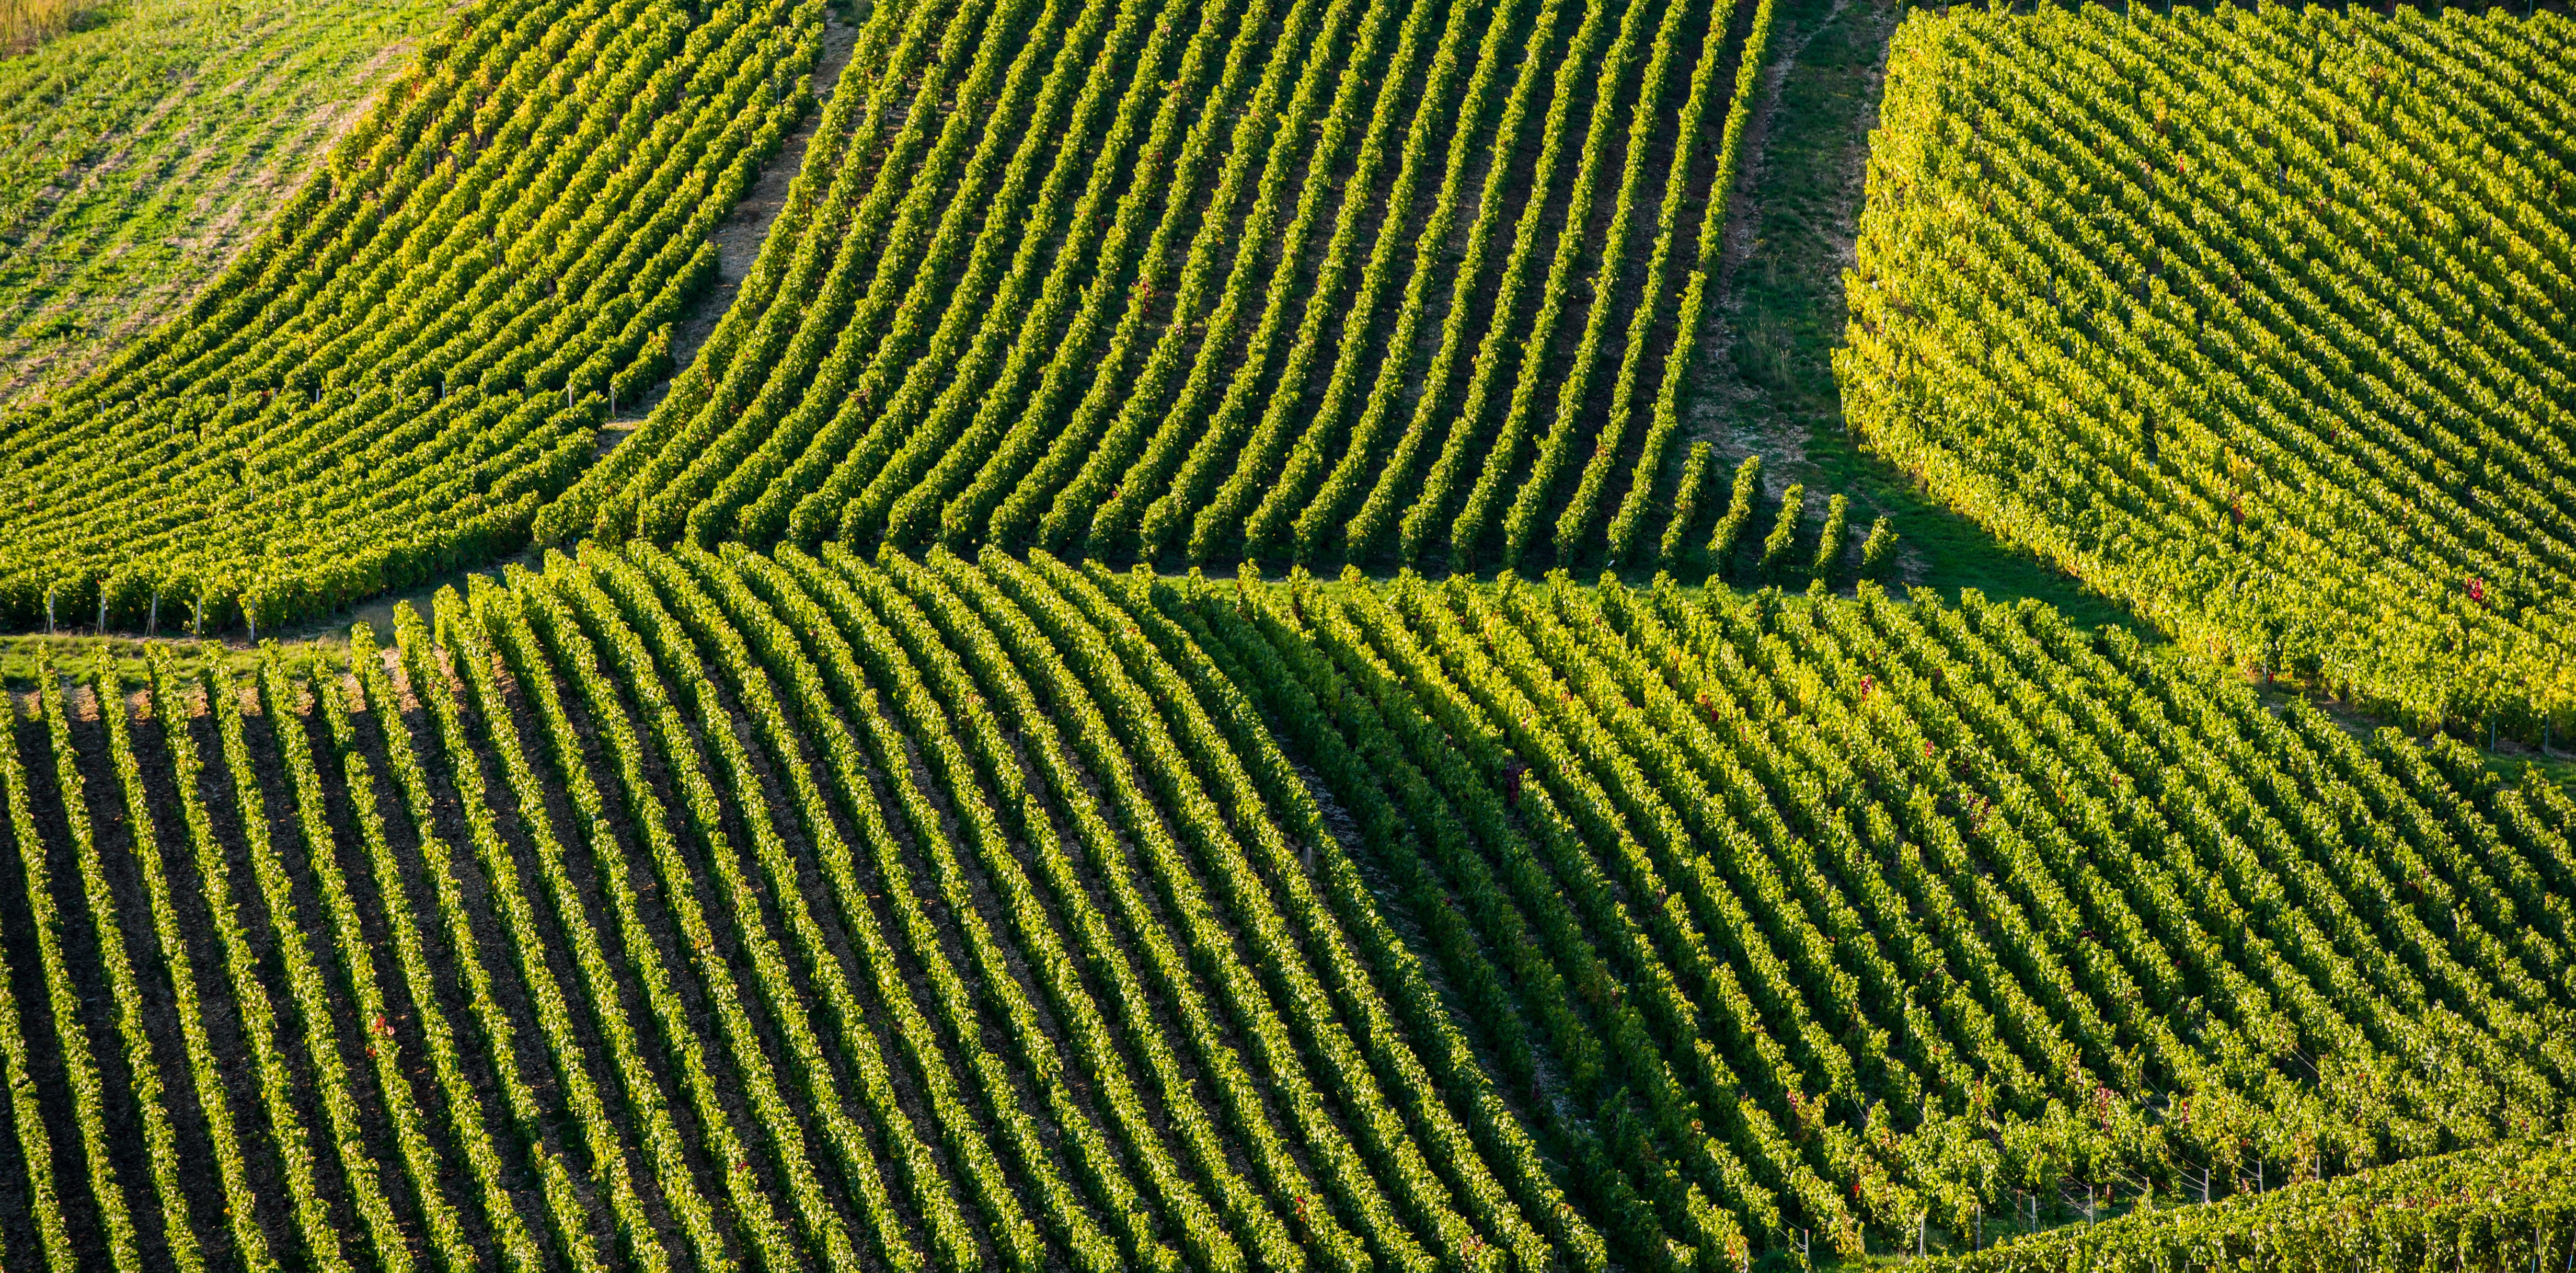 Vineyards in the Champagne region of France.